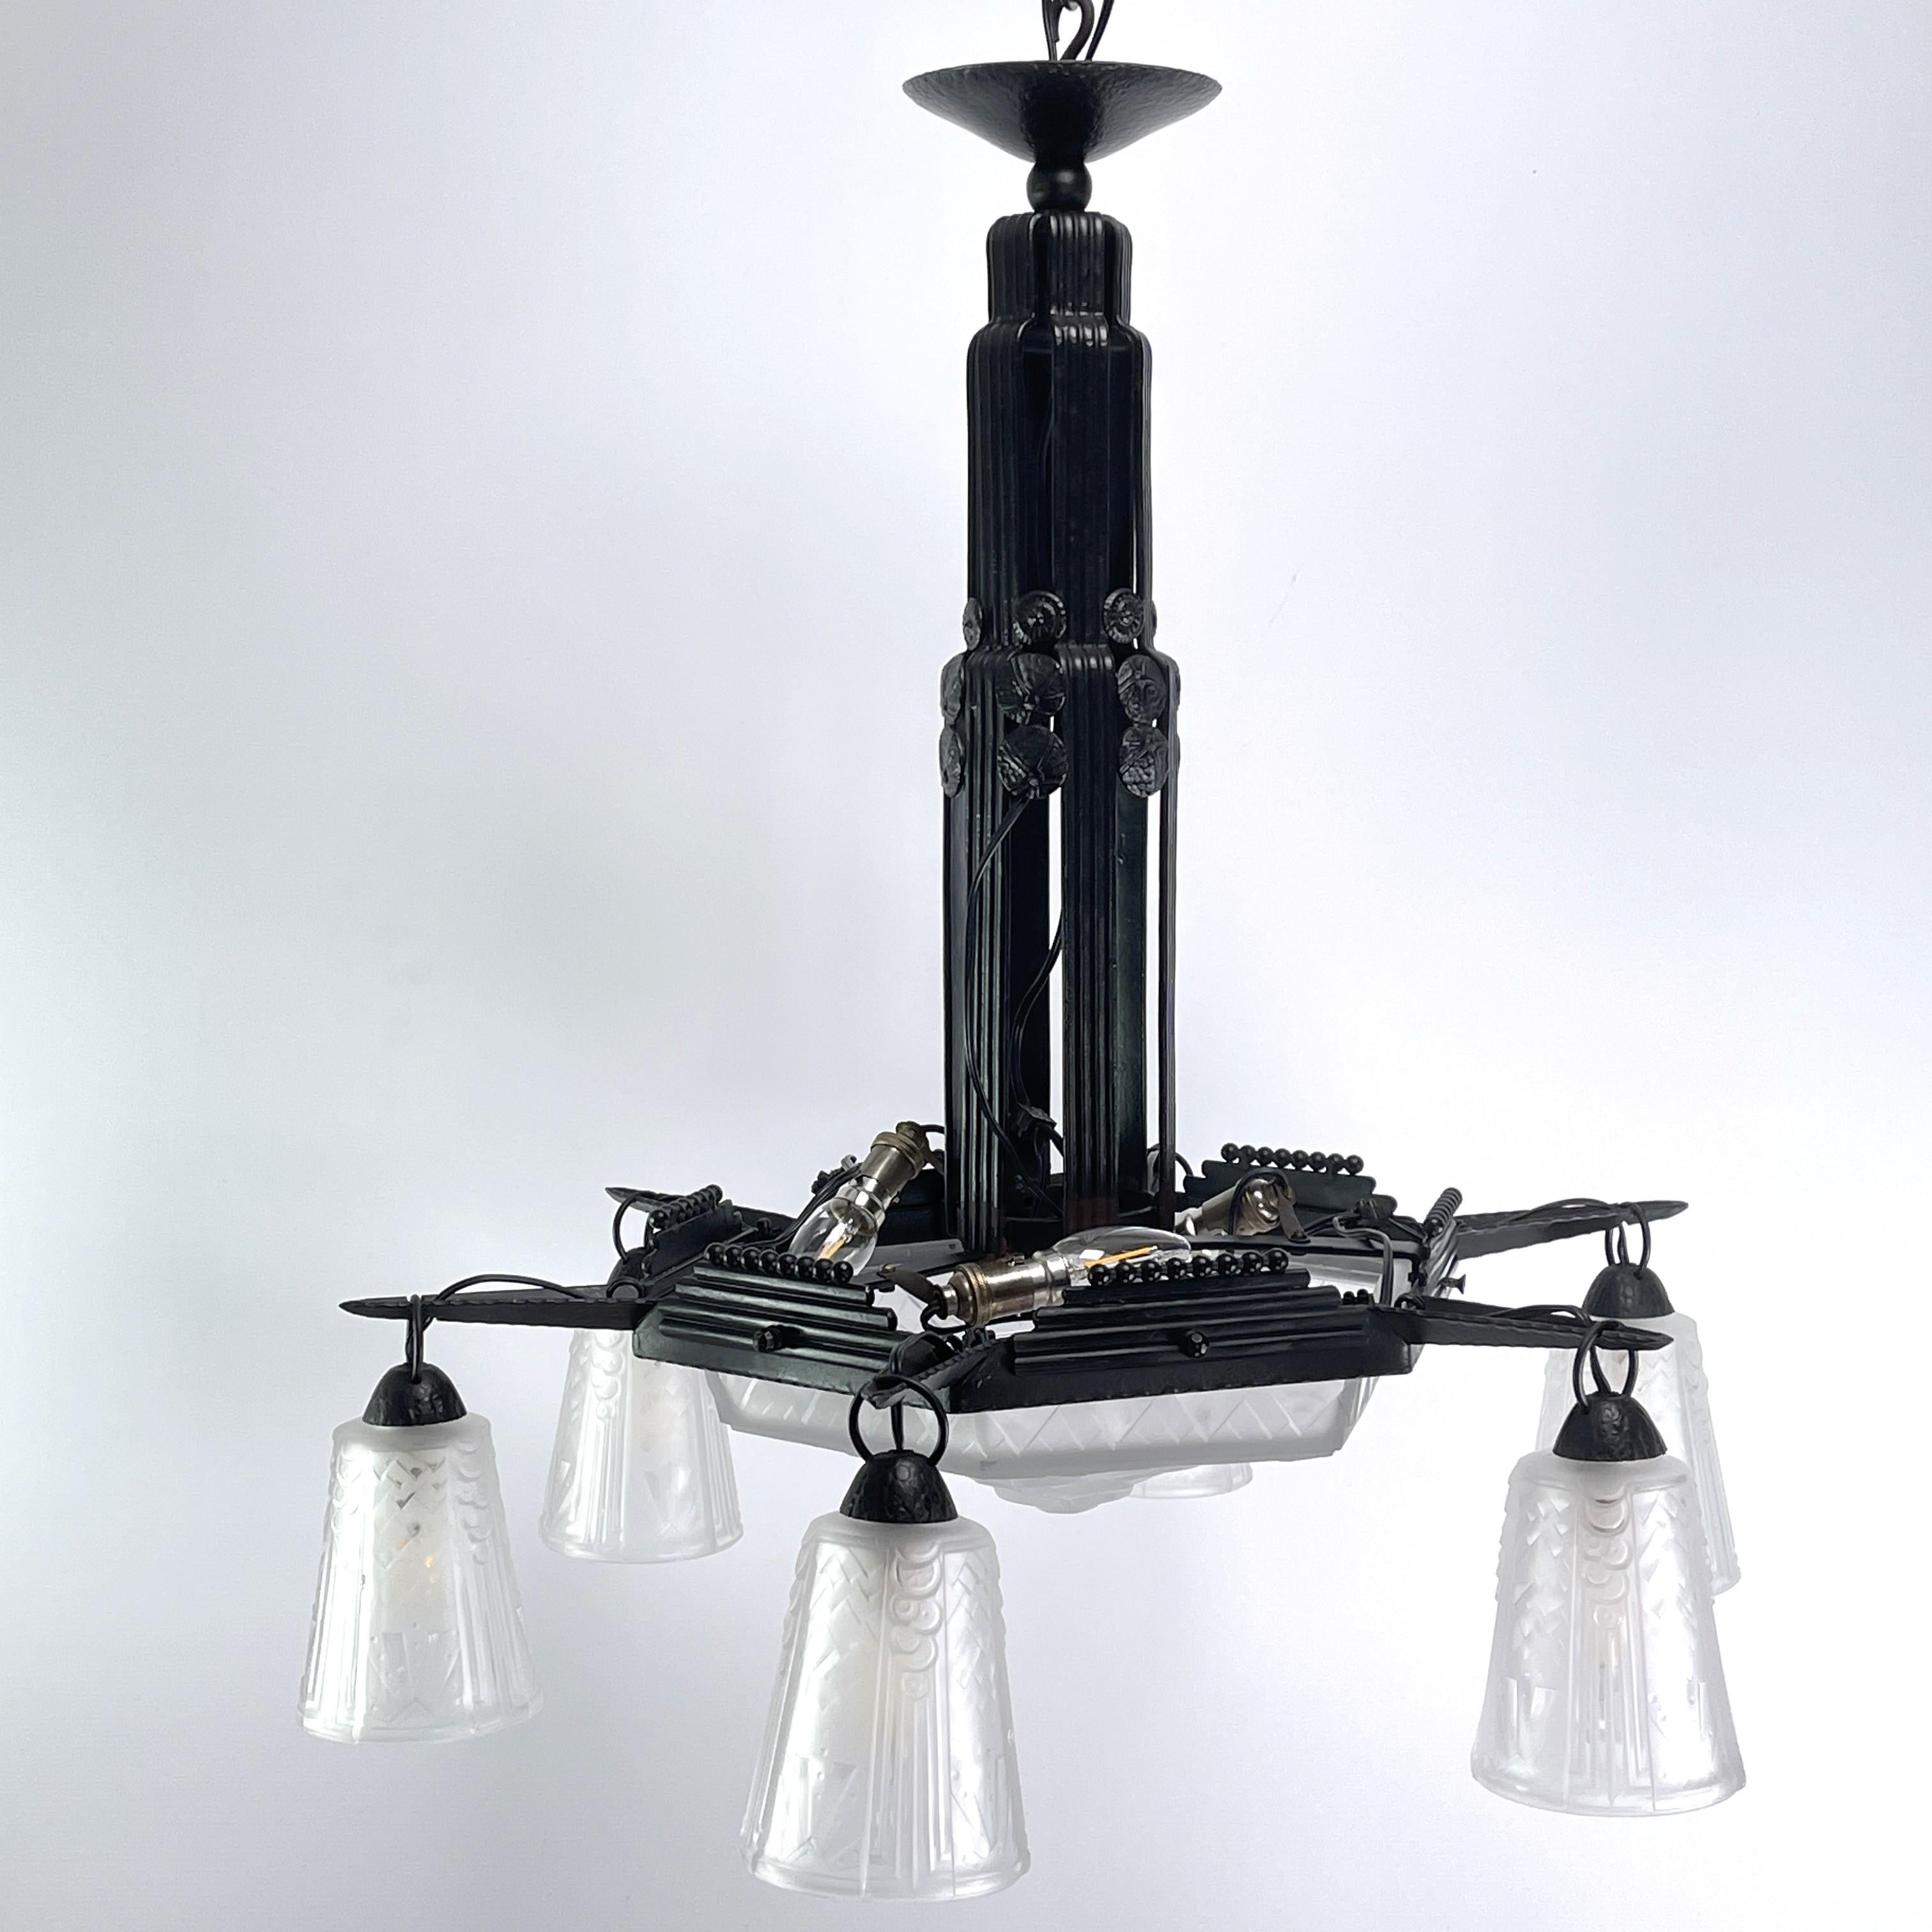 French Art Deco Ceiling Lamp by Muller Freres, Luneville and wrought iron by jag, 1930s For Sale